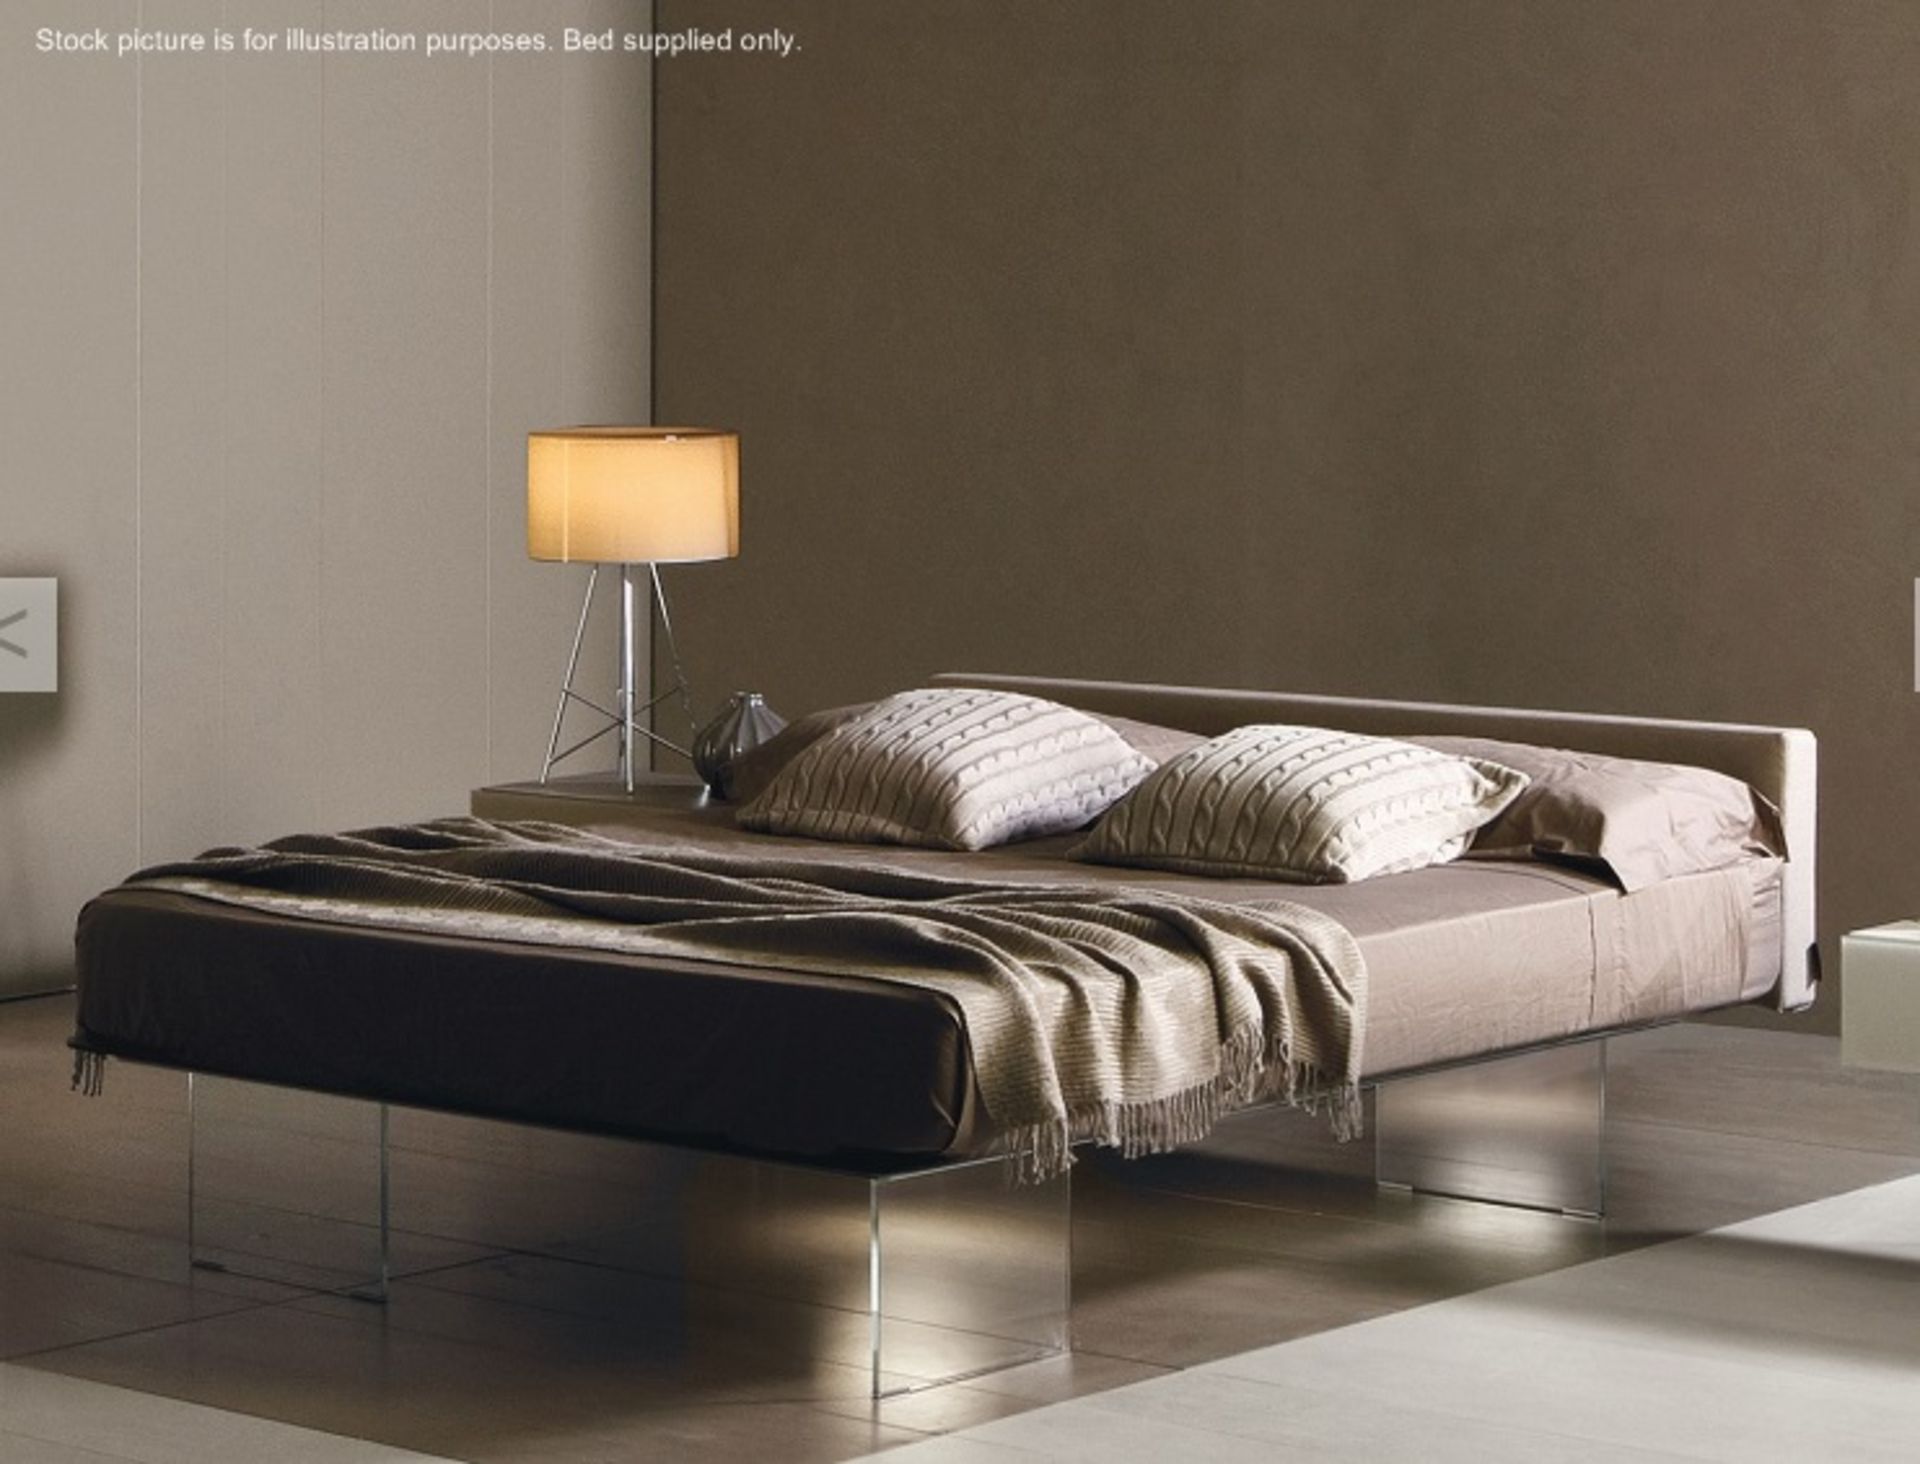 1 x Lago "AIR" Bed Frame With Headboard And Tempered Glass Legs - Made in Italy - Dimensions: